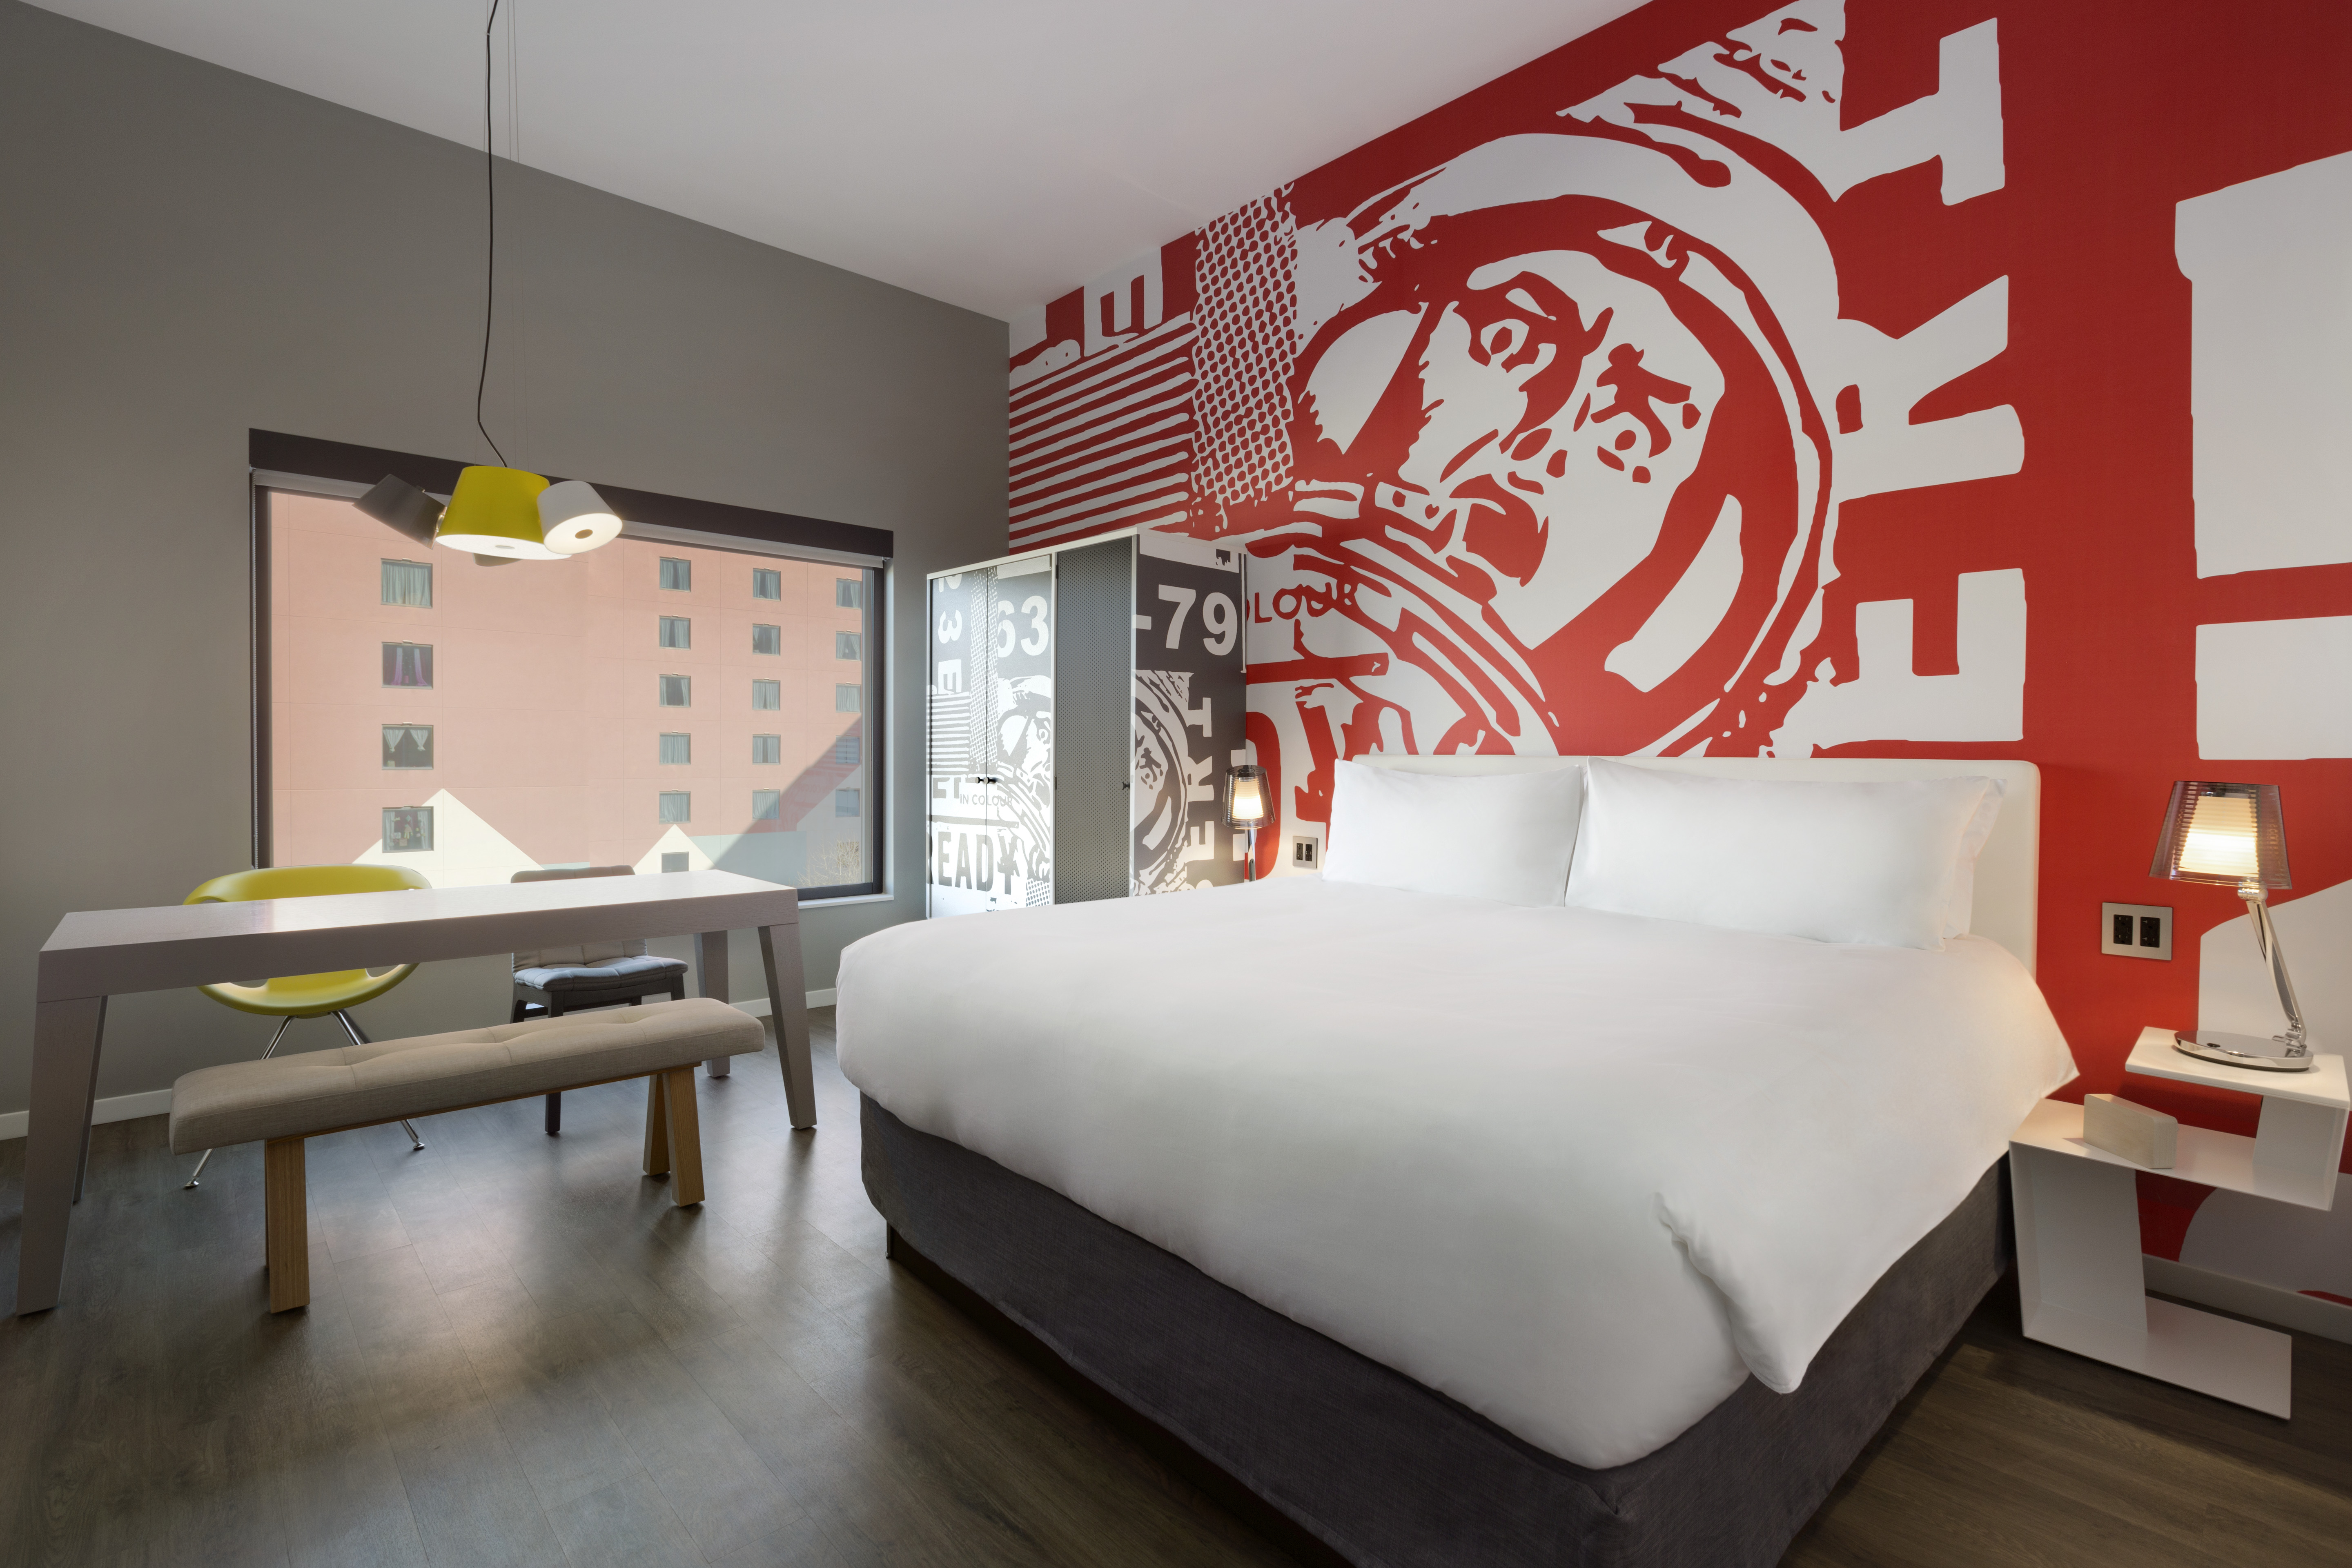 The Radisson Red brand will enter Perus hotel market with its first 110-guestroom property in Miraflores 